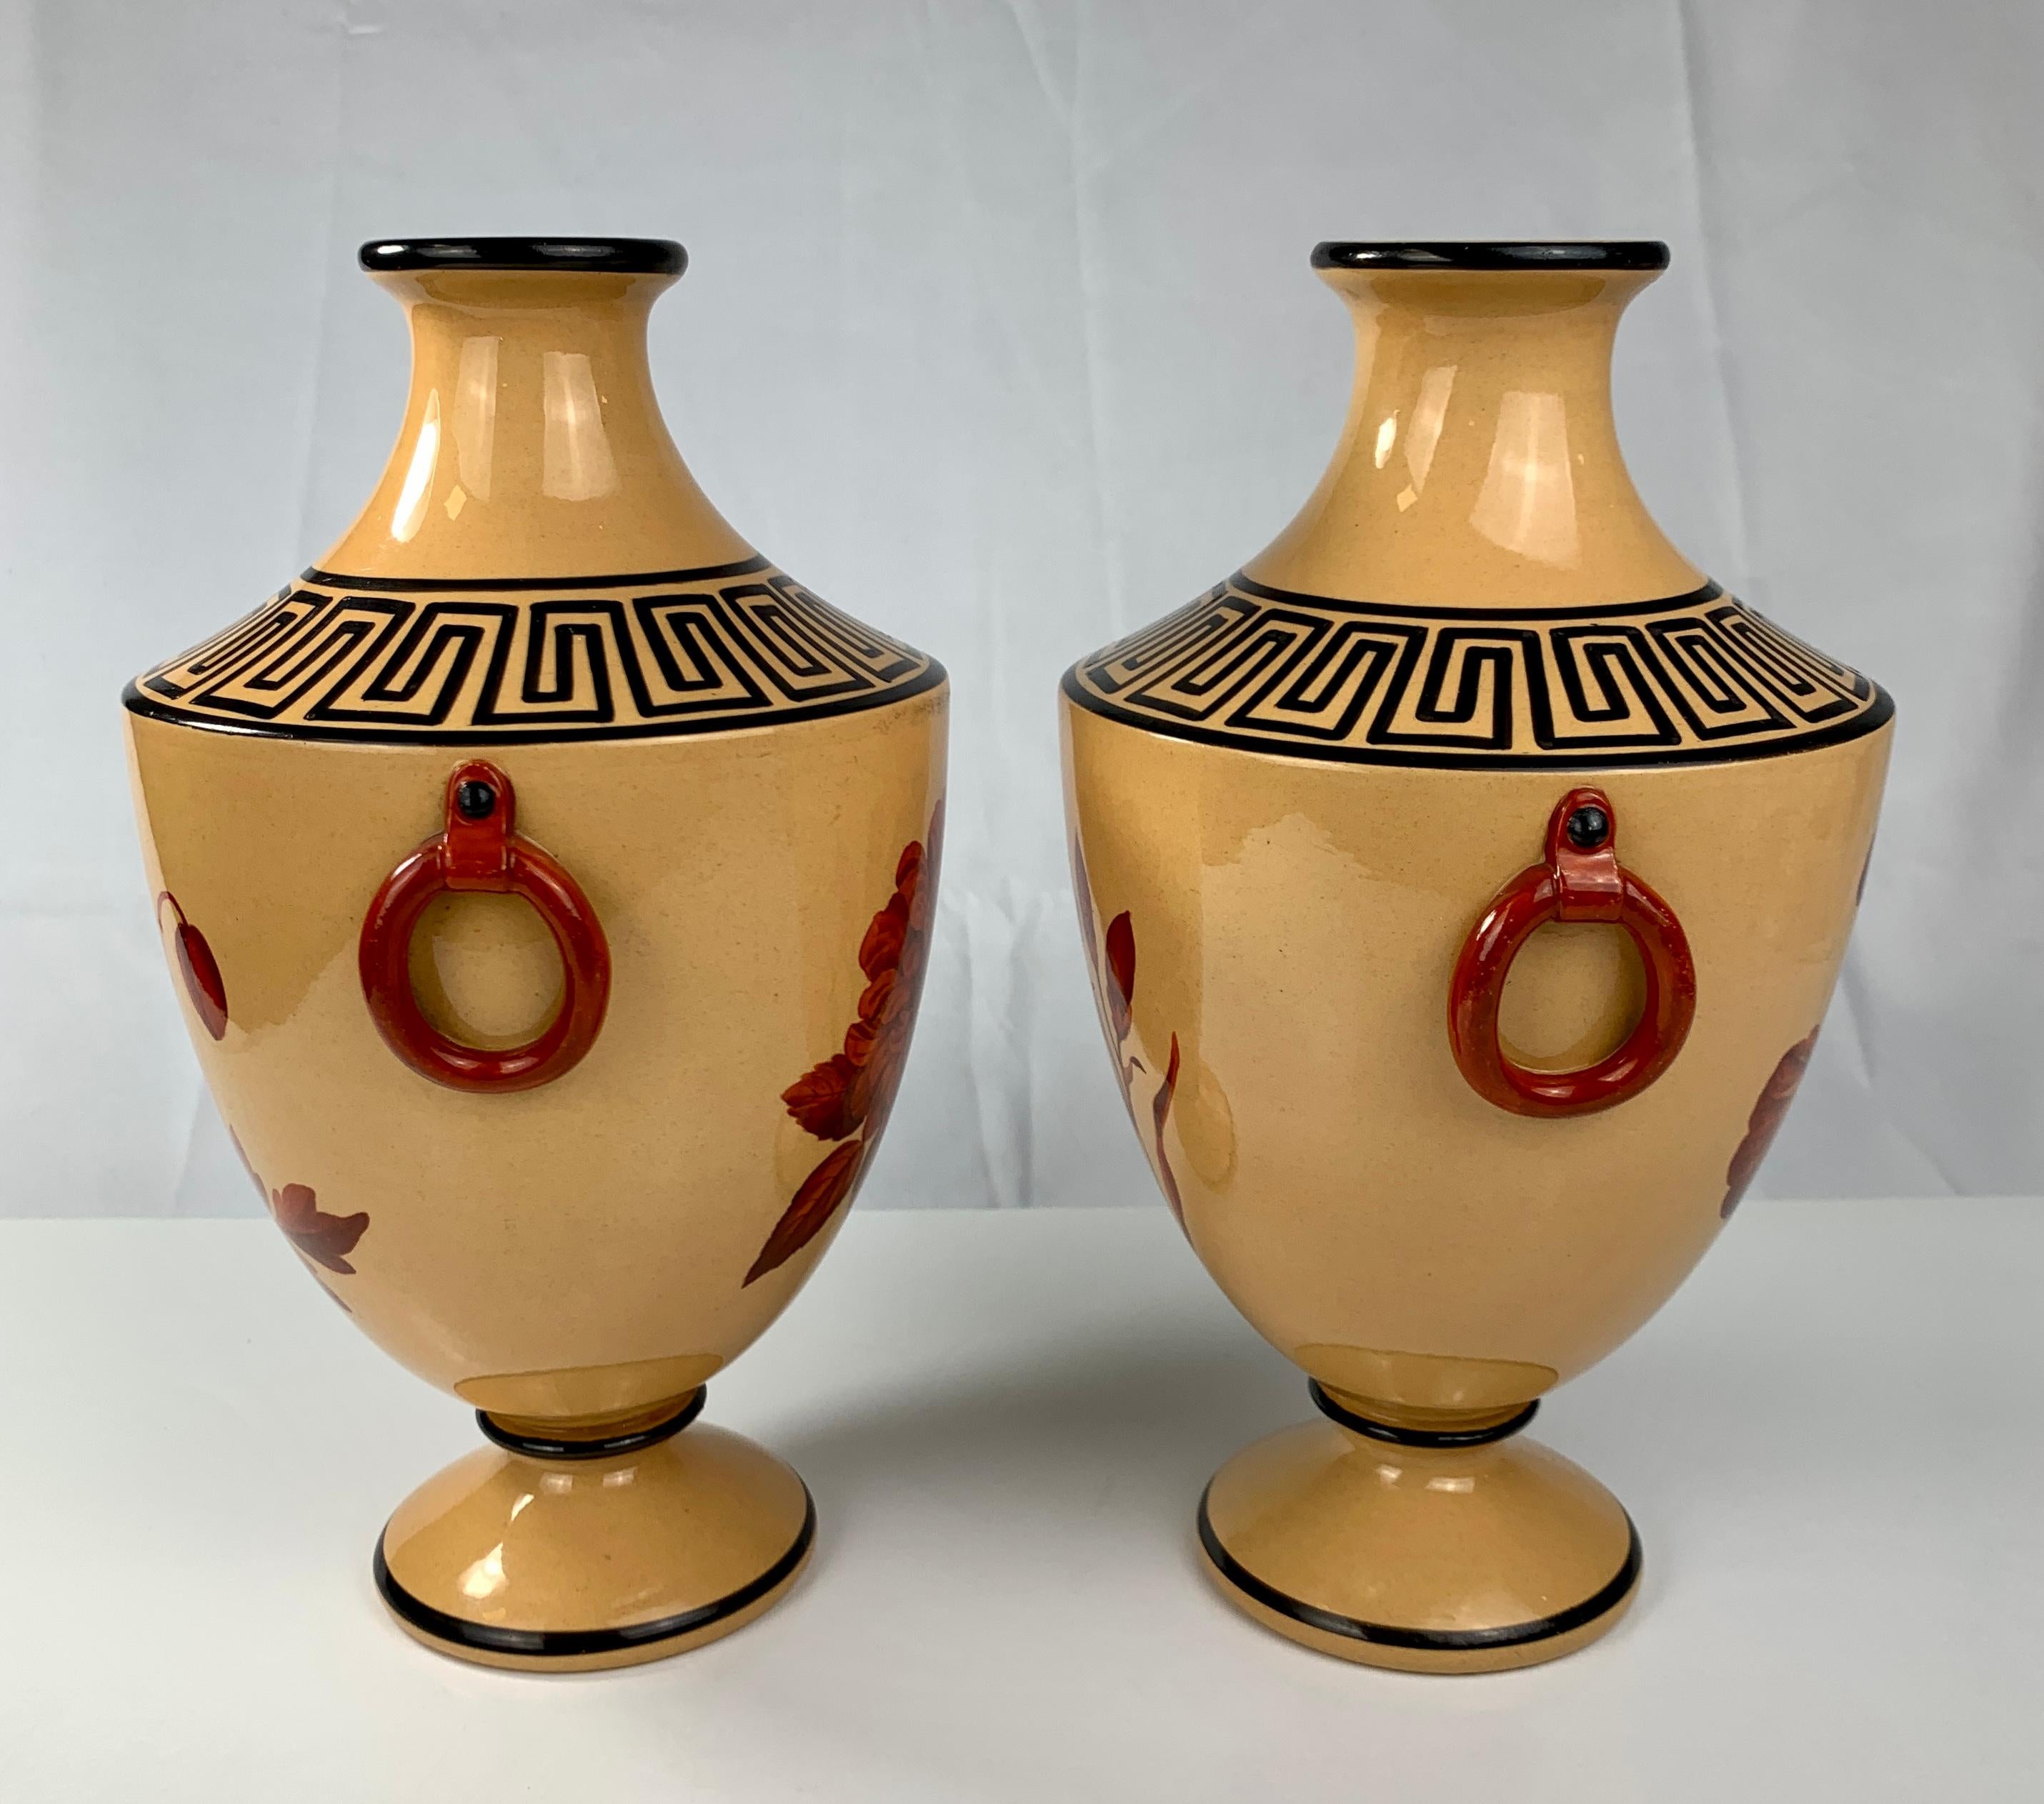 Earthenware Pair Neoclassical Vases Made Circa 1800 in England by Davenport